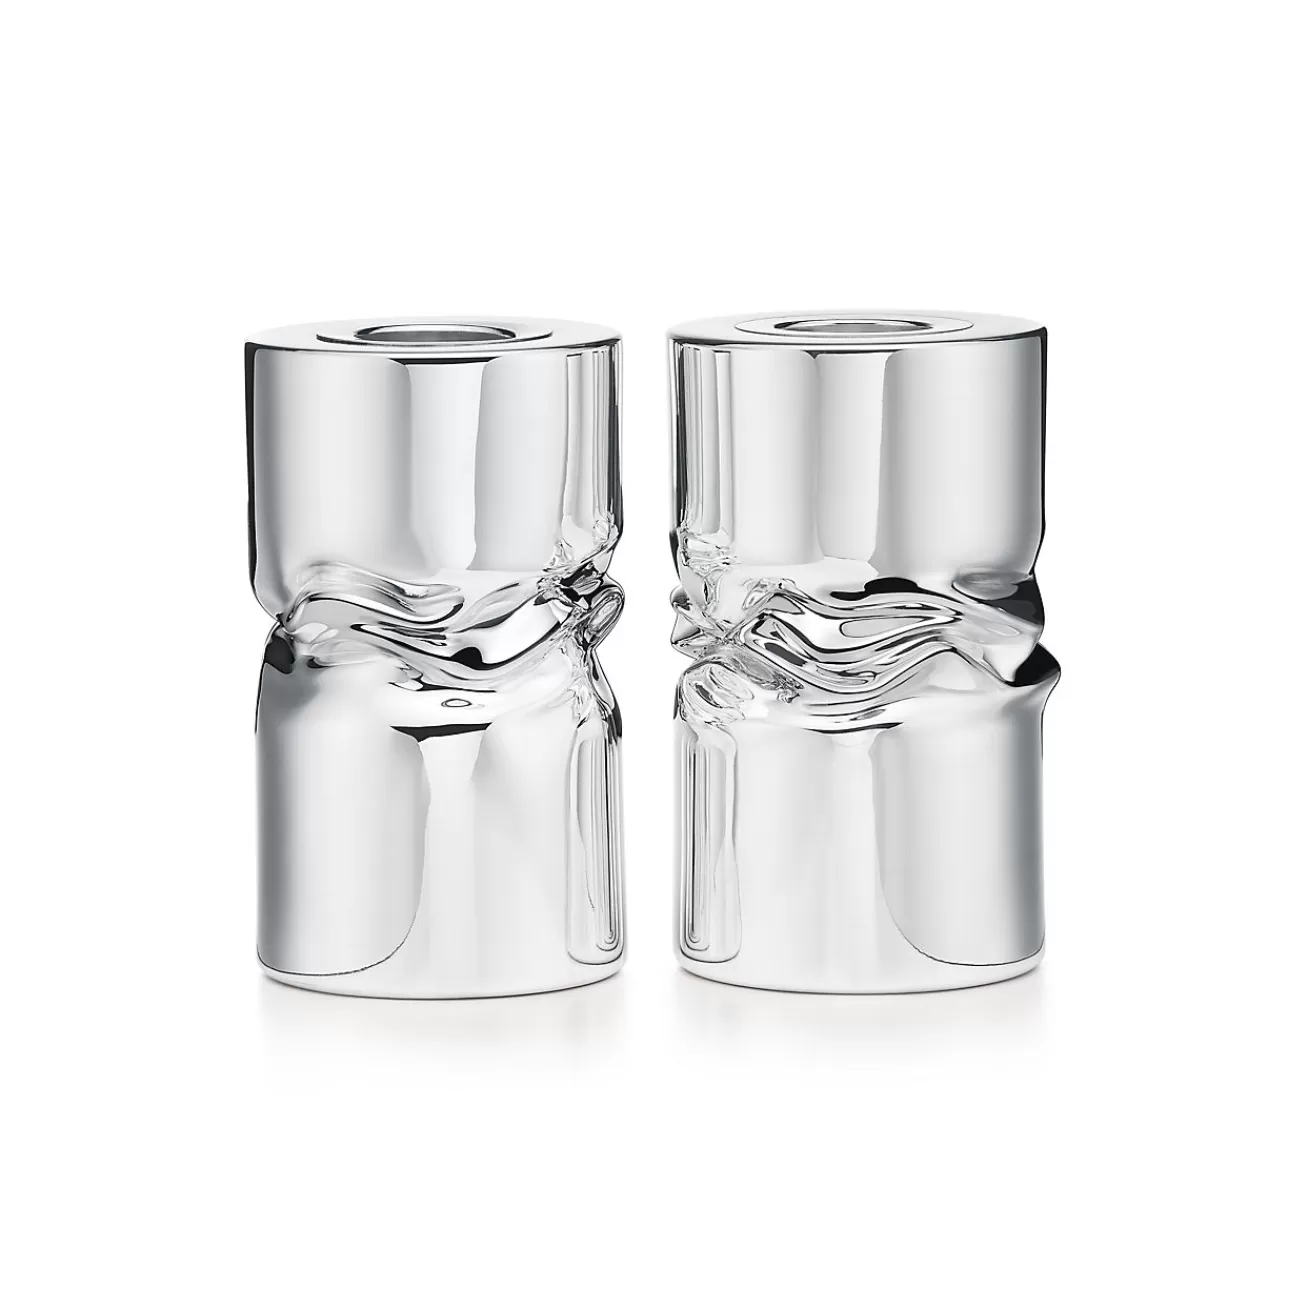 Tiffany & Co. Tiffany Silver Crush Candlesticks in Sterling Silver, Set of Two | ^ The Home | Housewarming Gifts